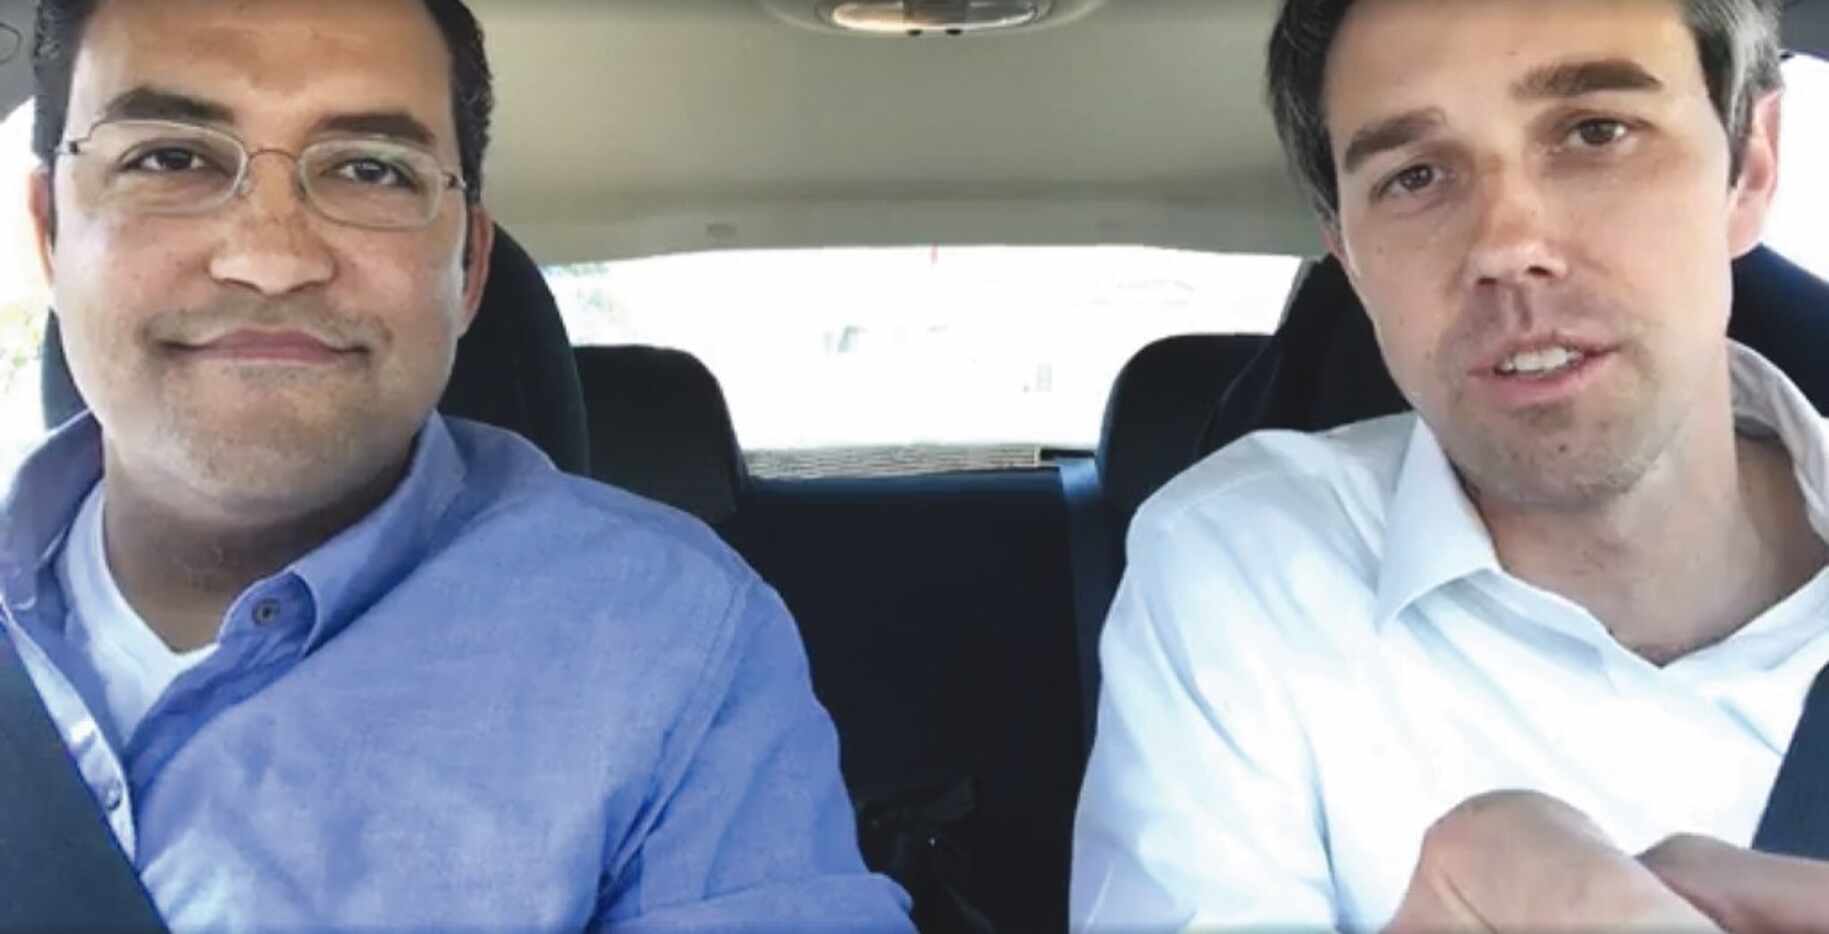 U.S. Reps. Will Hurd (left) and Beto O'Rourke drove from San Antonio to Washington after...